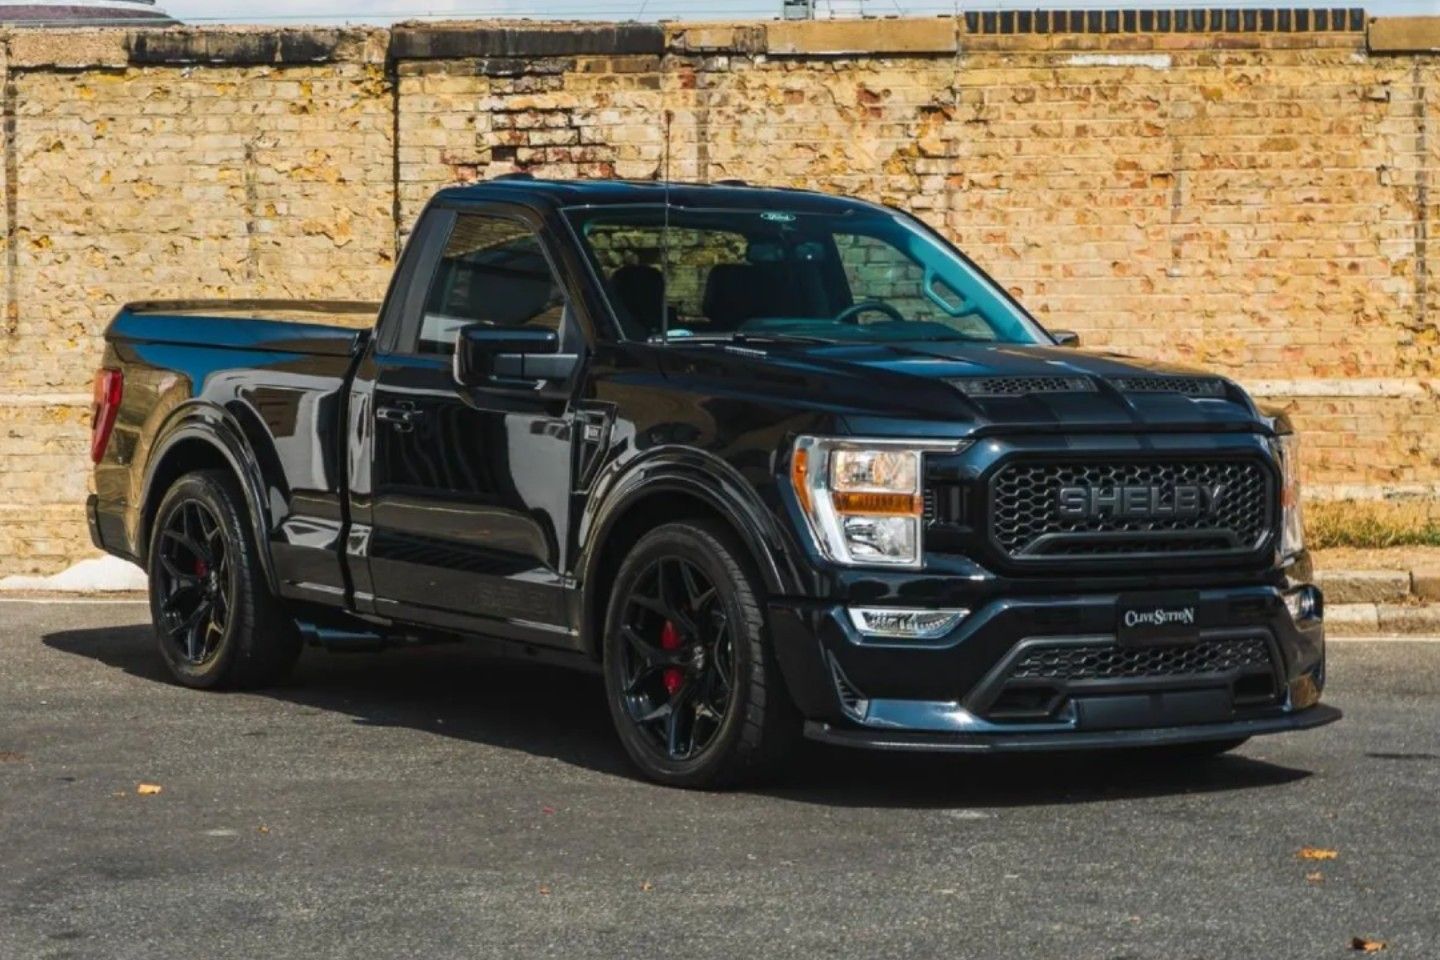 770hp Ford F-150 Shelby Super Snake Sport for sale - PistonHeads UK